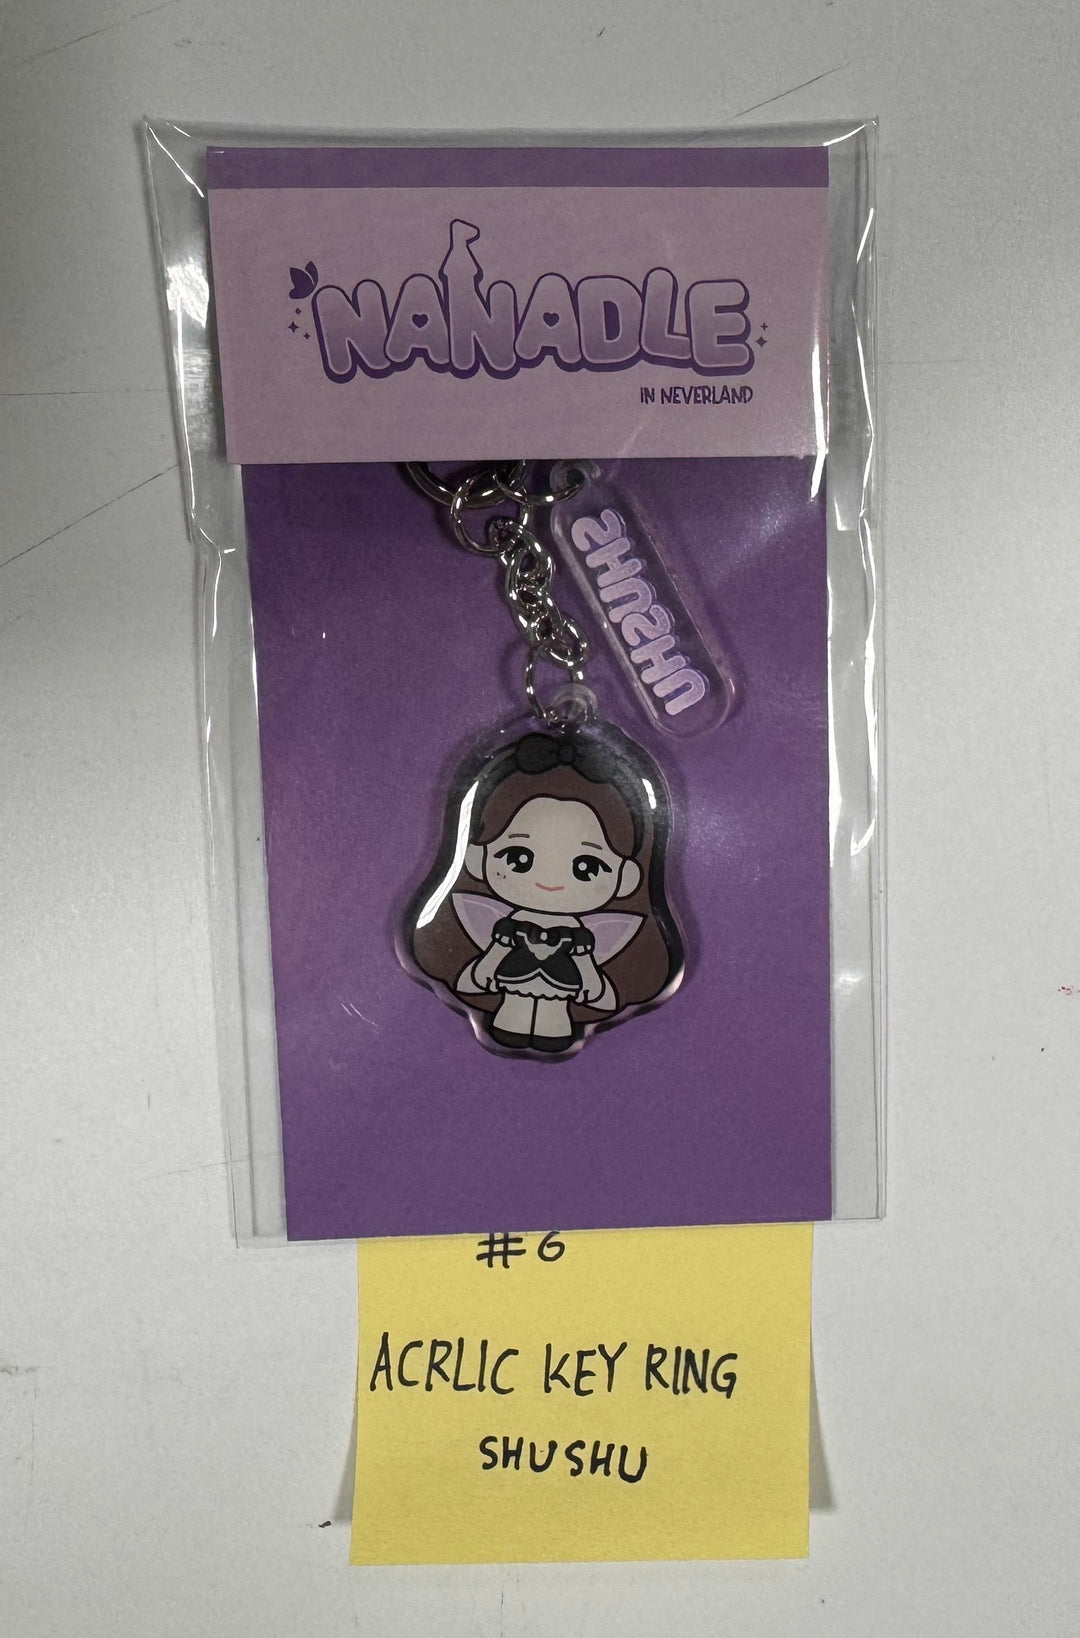 (g) I-DLE "NANADLE IN NEVERLAND" -Soundwave Pop-Up MD [Hand Mirror, Mini Pouch Patch Set, Acrylic Keyring, Photocard Acrylic Stand] [24.5.2]